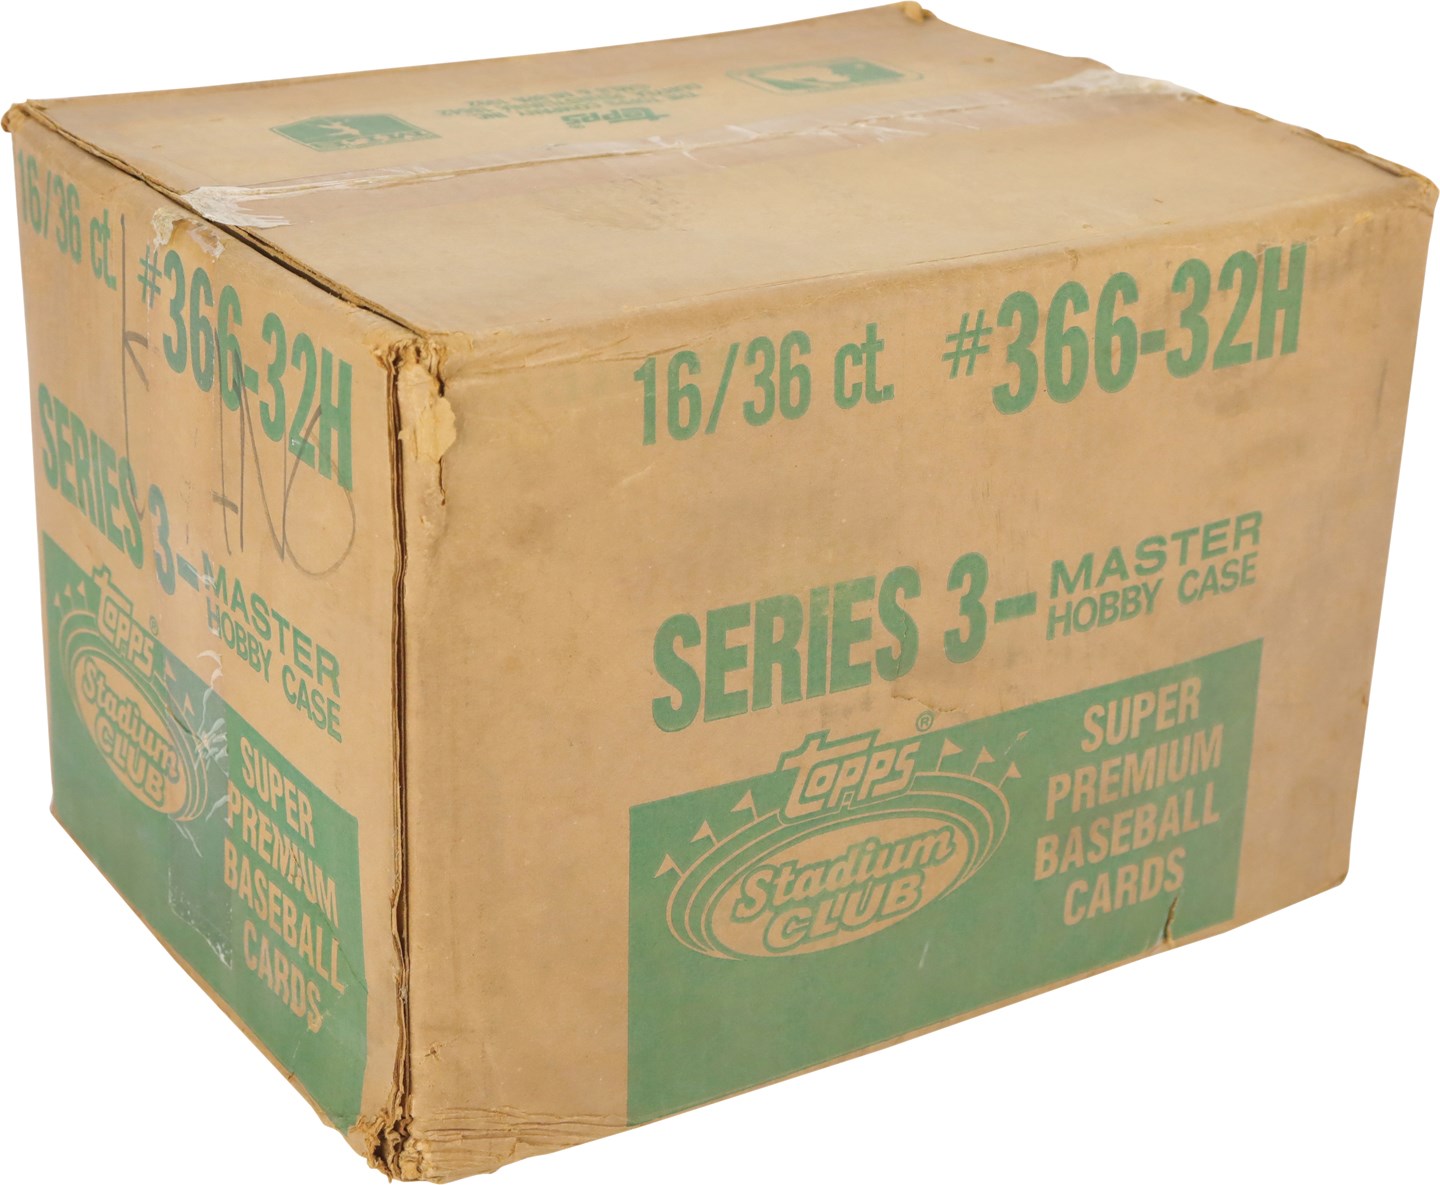 Unopened Boxes, Packs And Cases - 1991 Stadium Club Baseball Wax Case w/16 Unopened Boxes